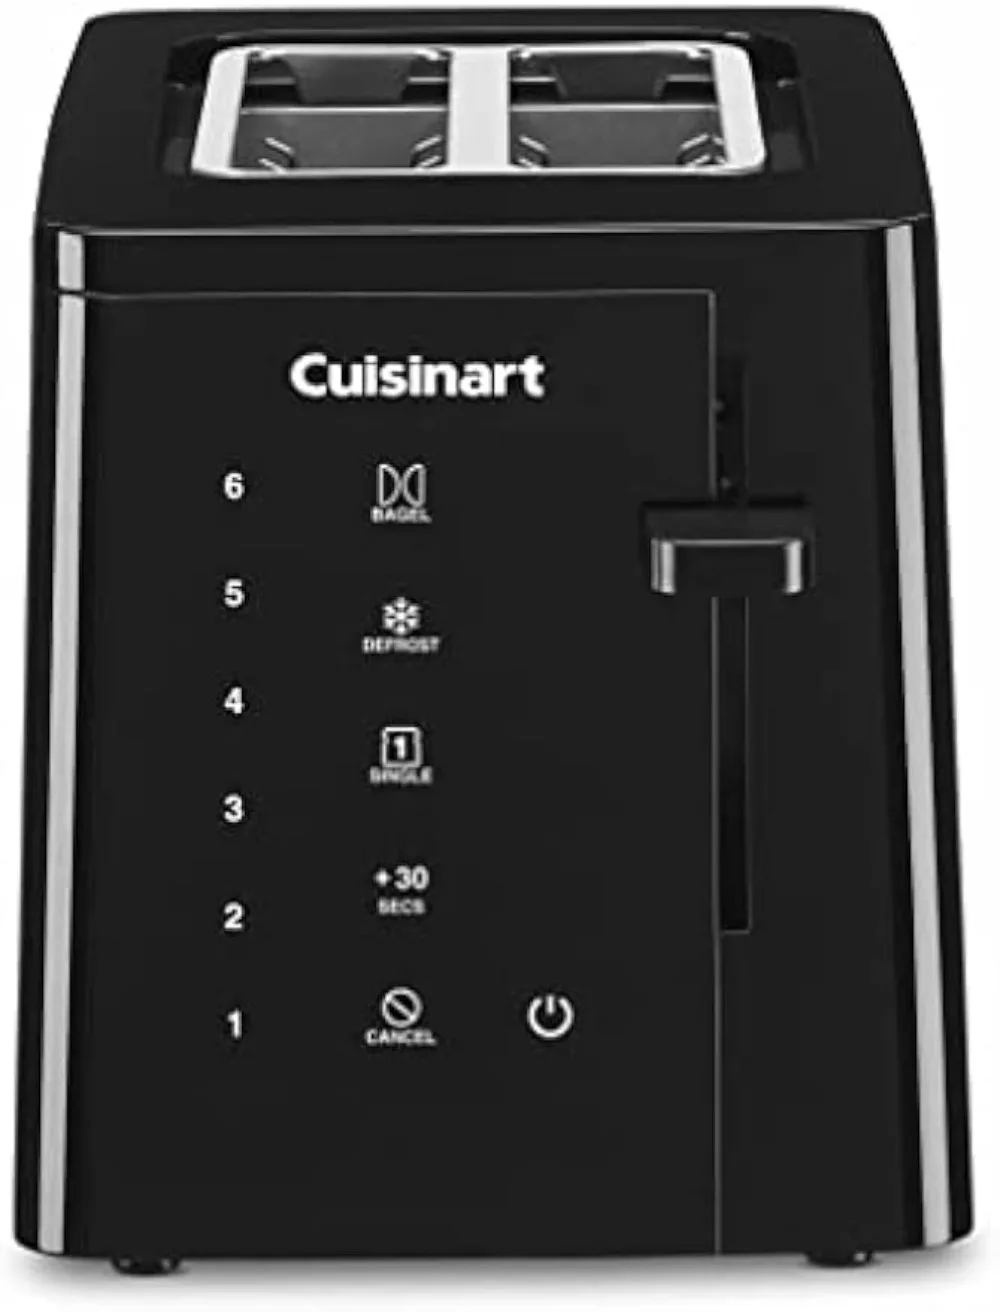 

Cuisinart CPT-T20 2-Slice Touchscreen Toaster,1.5 ounce, Black